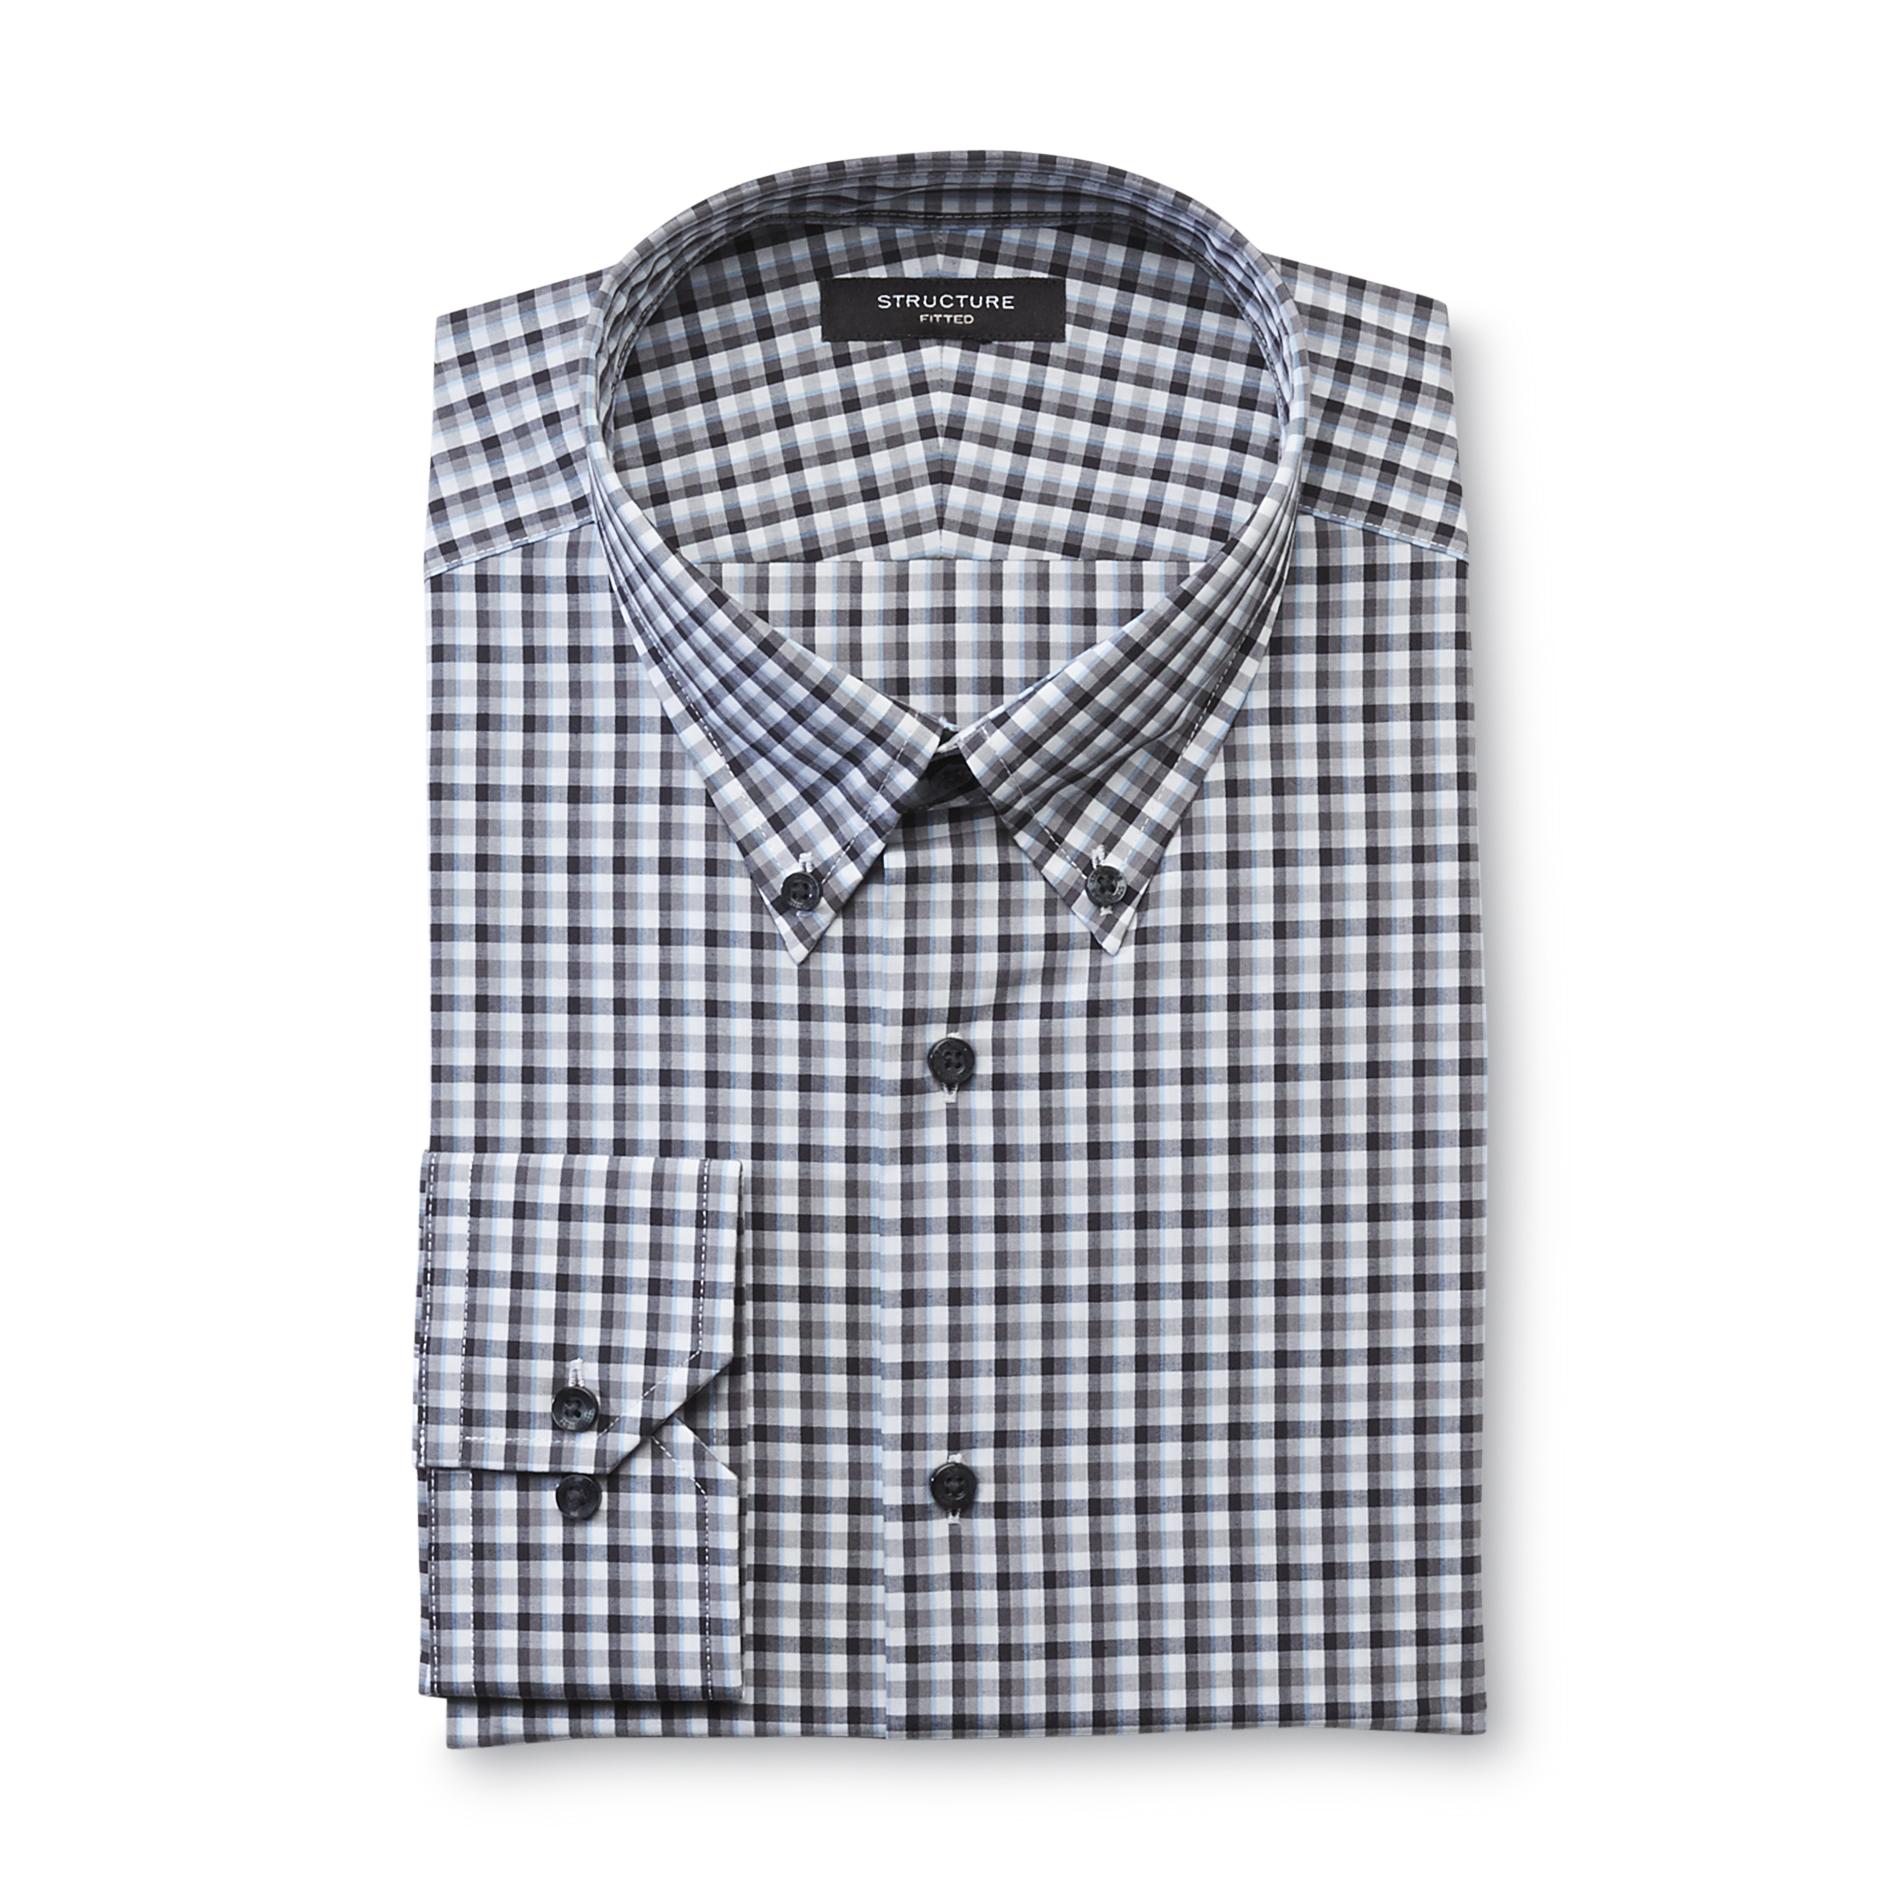 Structure Men's Fitted Wrinkle Free Dress Shirt - Check Pattern